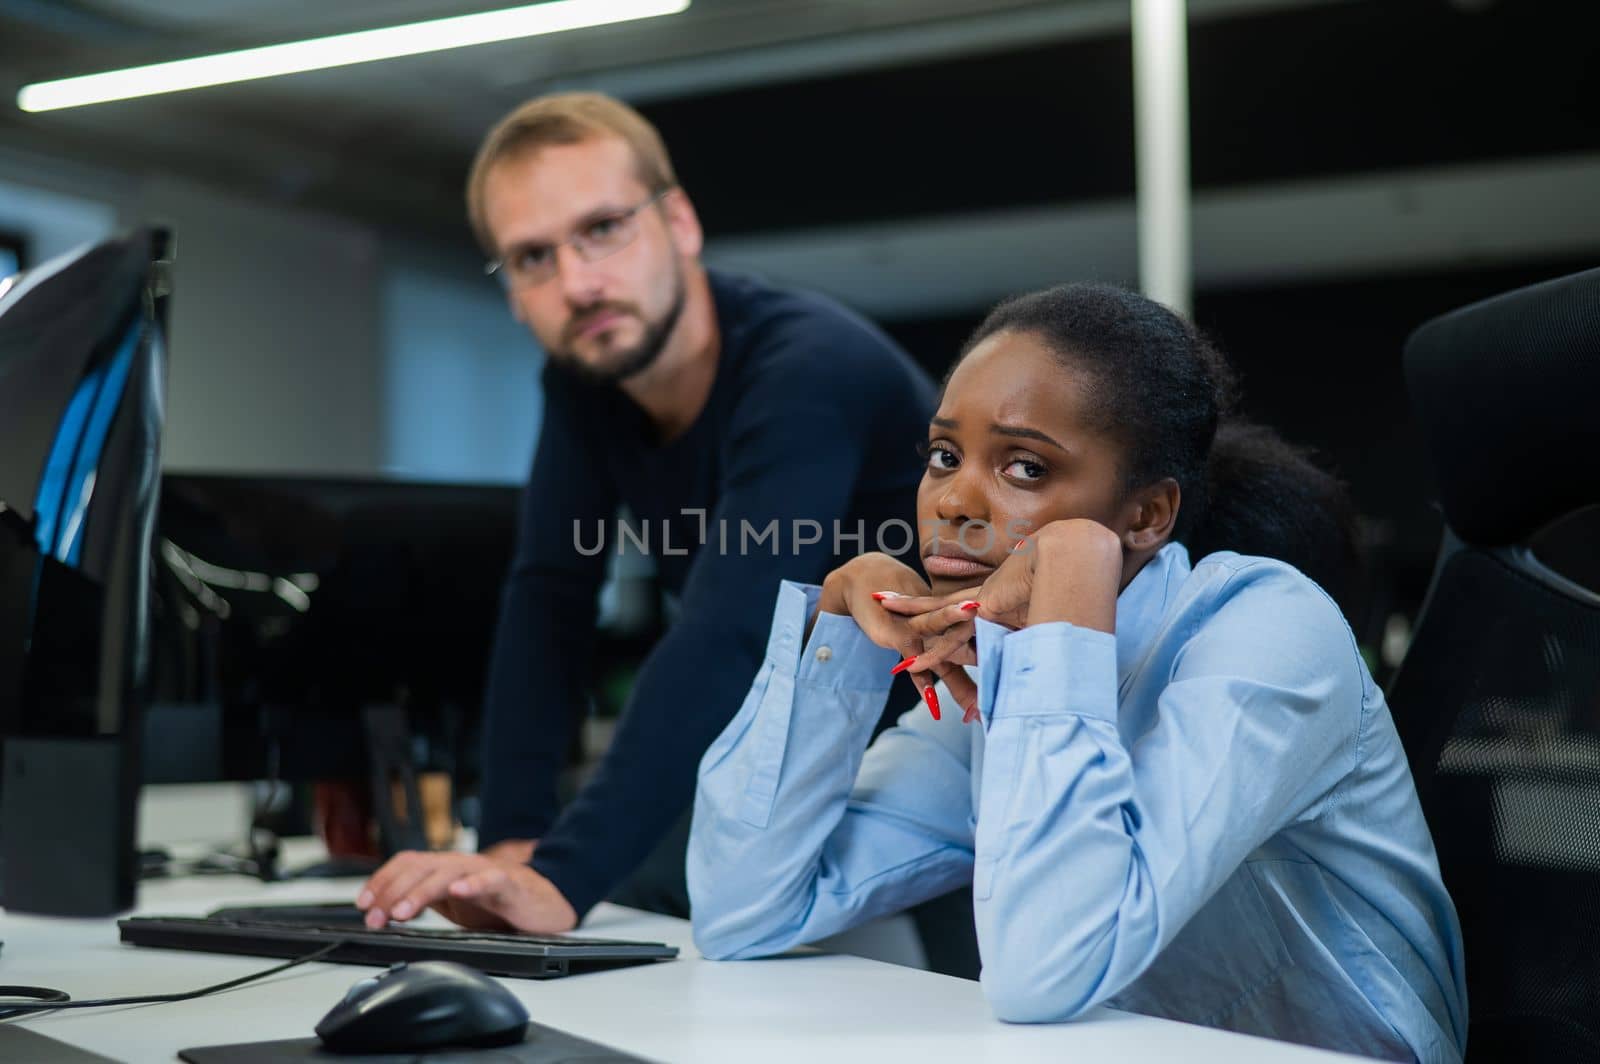 Colleagues look at the monitor and decide working moments. Caucasian man helps sad african woman solve computer problem